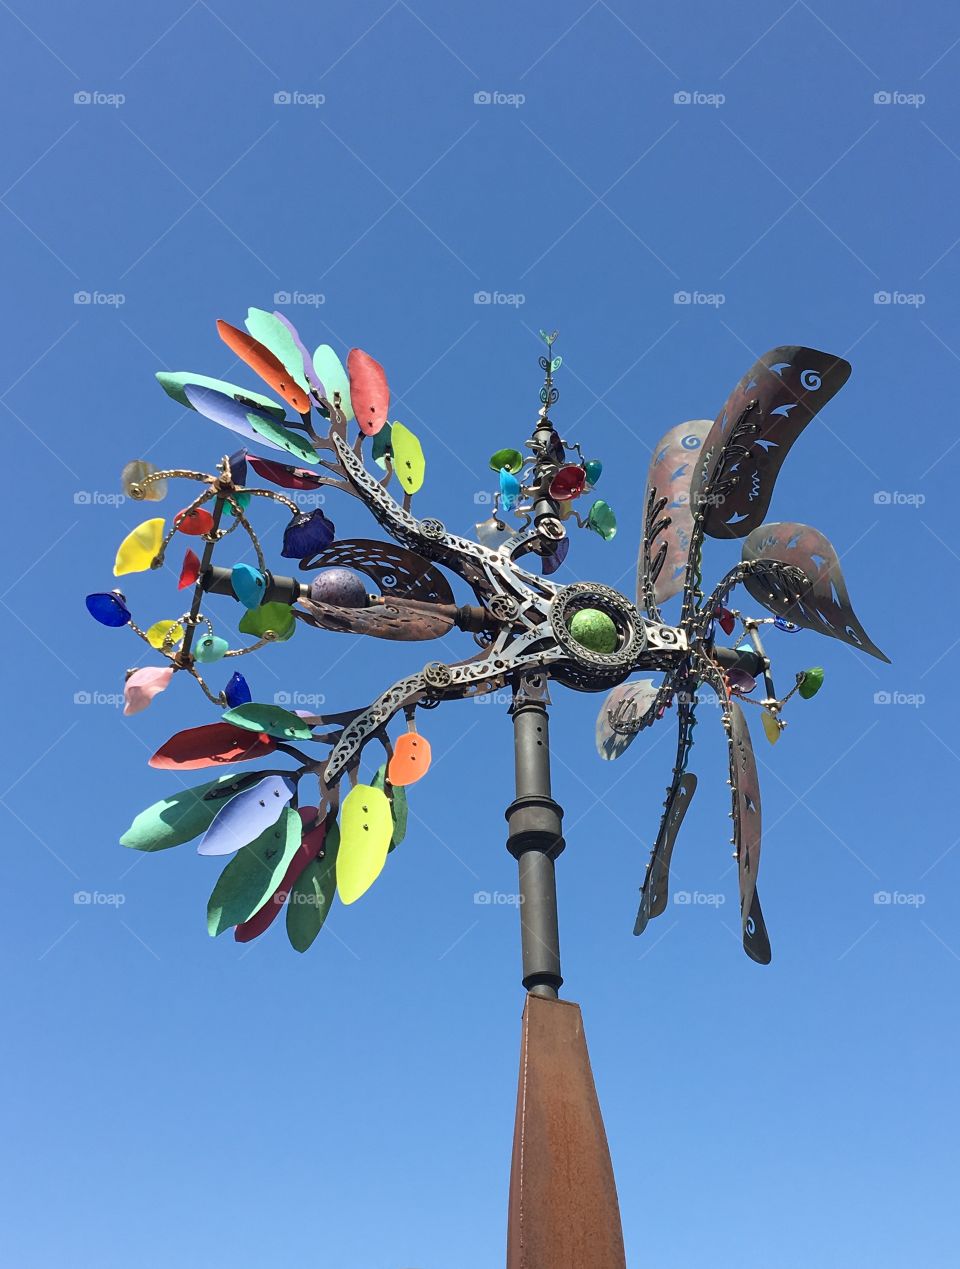 A creative, colorful, artsy wind mill turning from the breeze and a blue sky